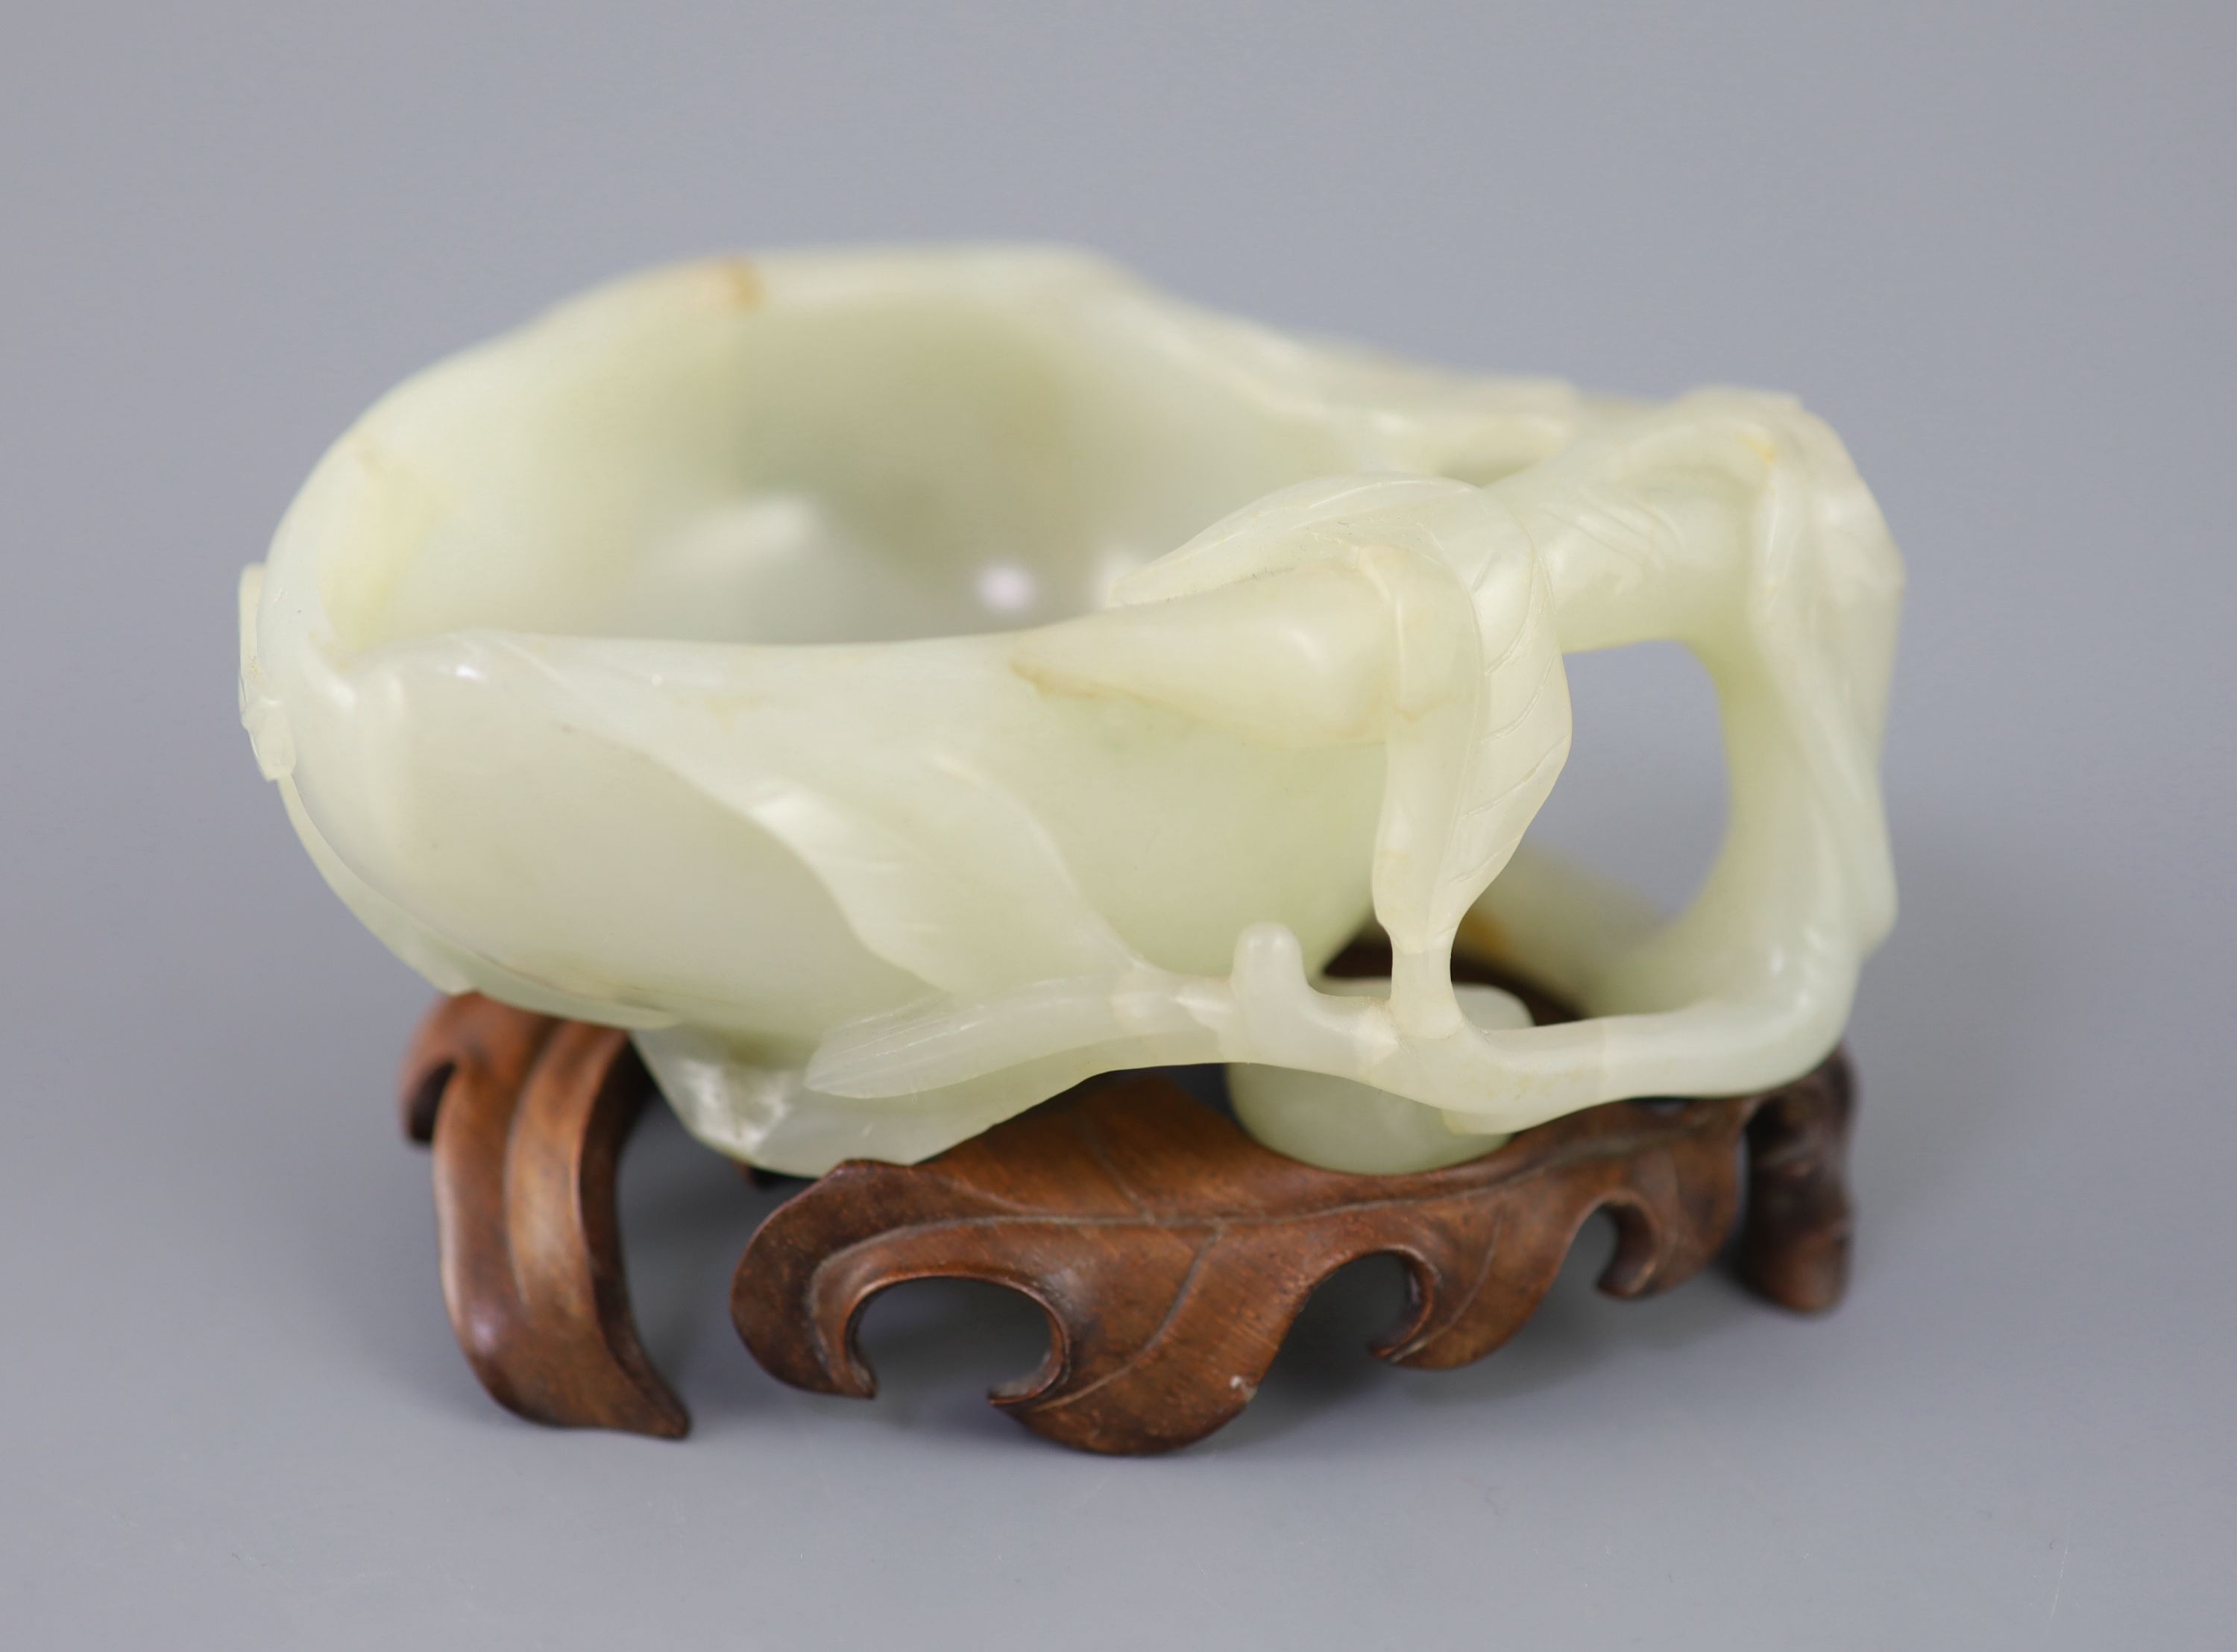 A Chinese pale celadon jade peach brush washer, 17th/18th century 11.3cm at widest point, wood stand